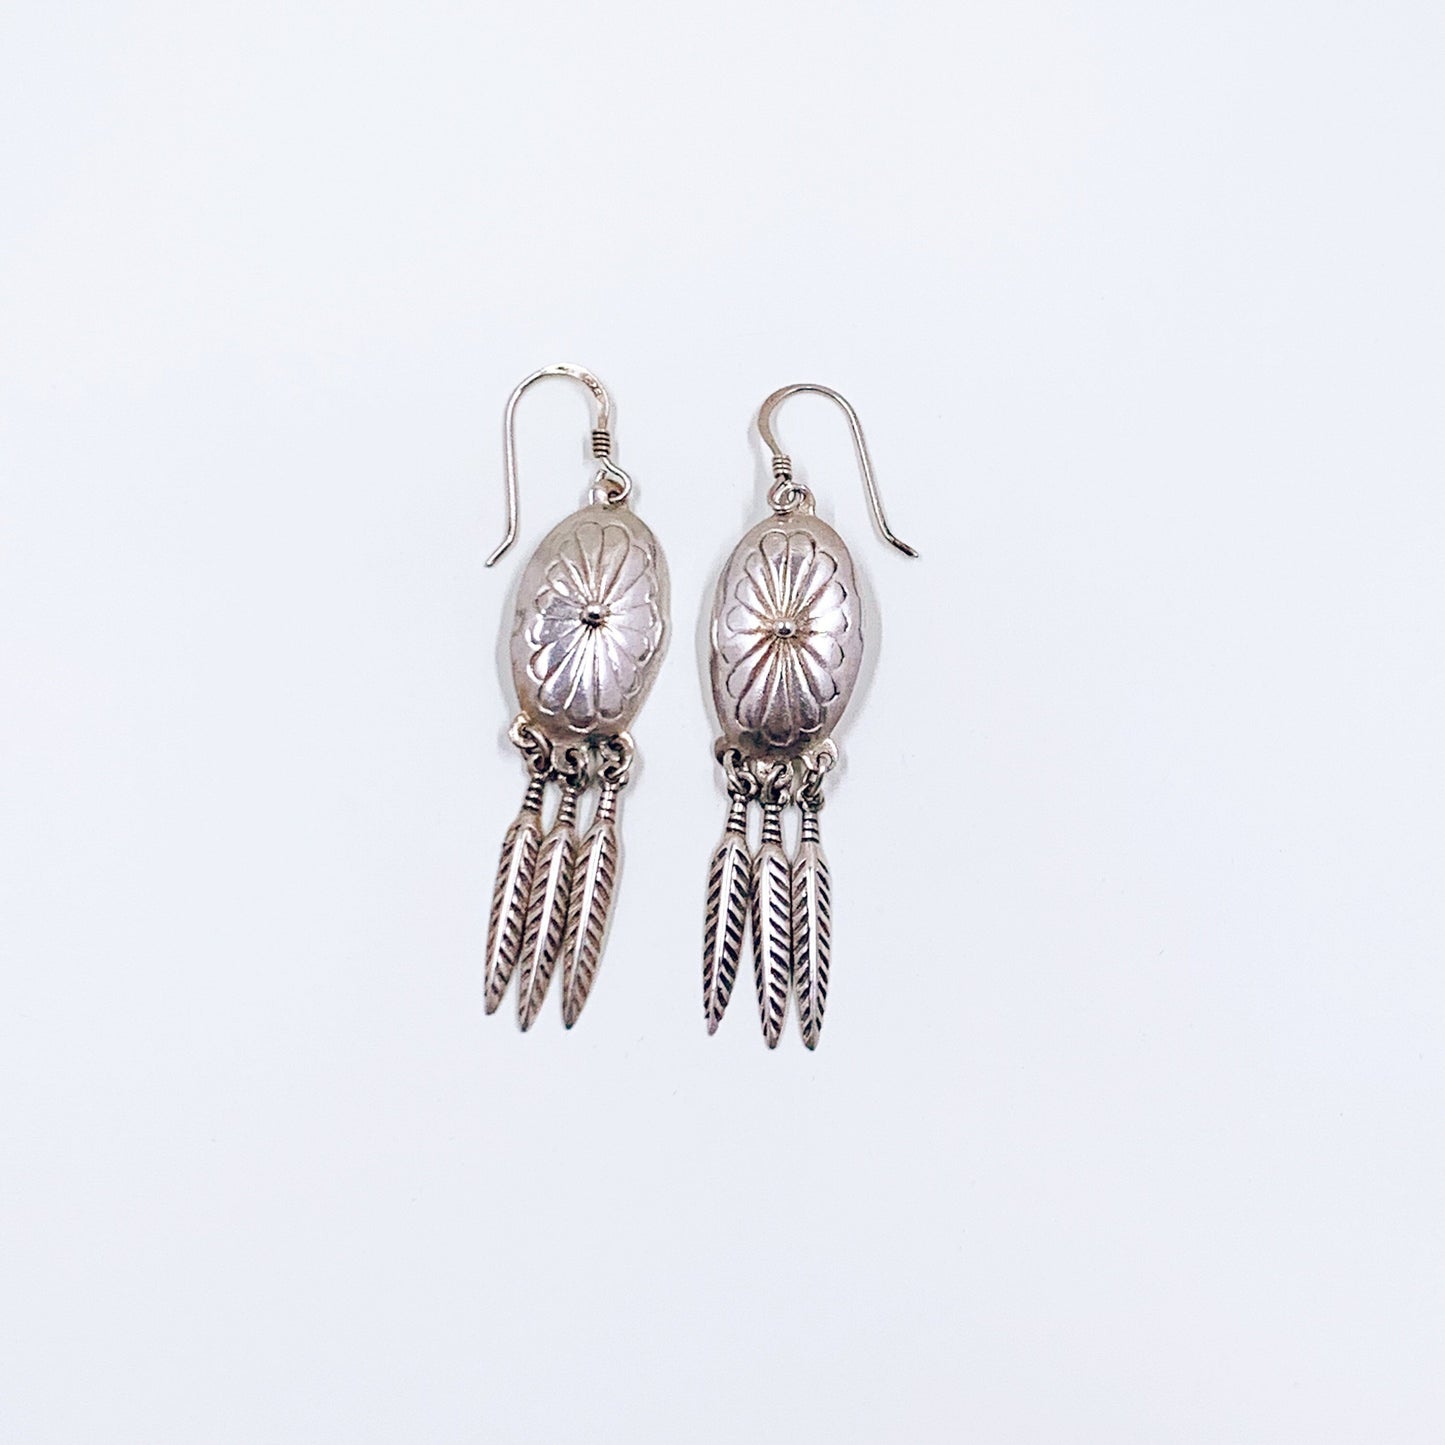 Vintage Silver Concho and Feather Earrings | Southwest Silver Feather Fringe Earrings